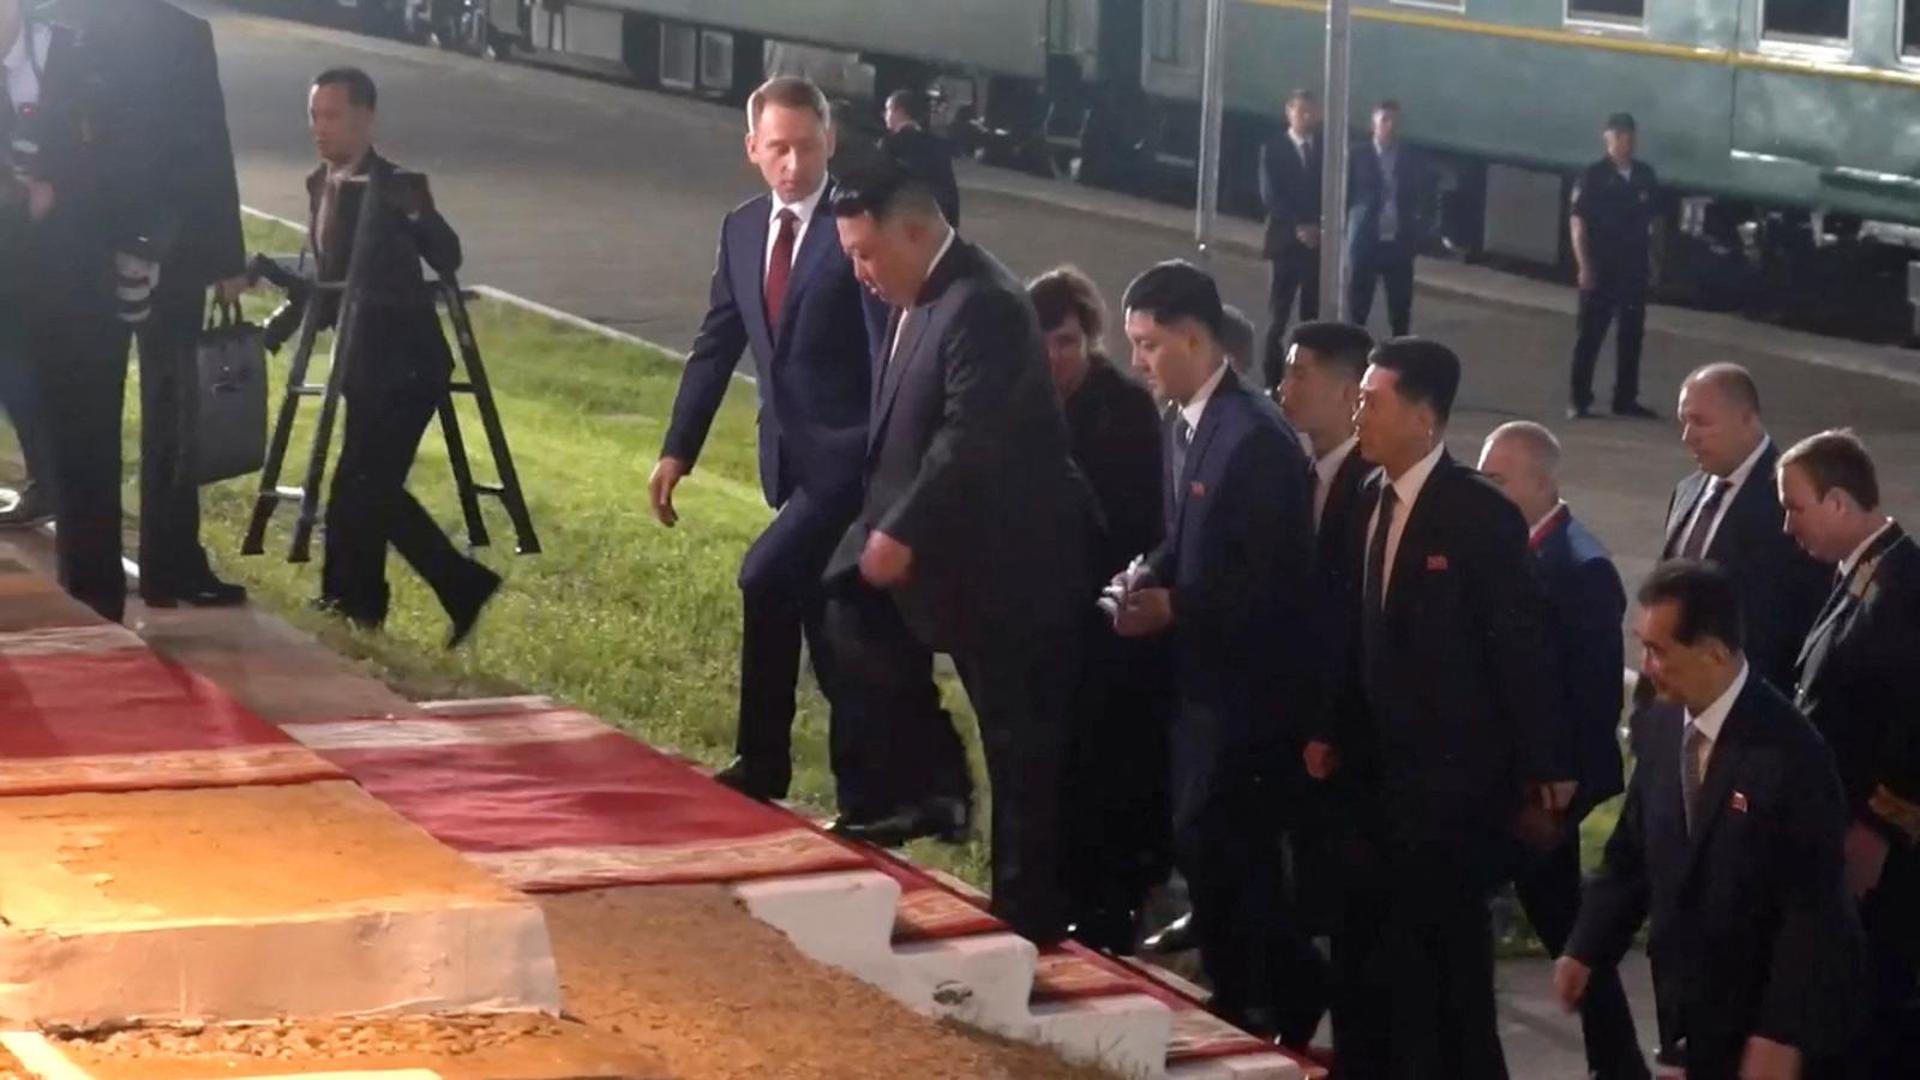 A view shows North Korean leader Kim Jong Un entering a building after disembarking from his train in Khasan in the Primorsky region, Russia, in this still image from video published September 12, 2023. Courtesy Governor of Russia's Primorsky Krai Oleg Kozhemyako Telegram Channel via REUTERS ATTENTION EDITORS - THIS IMAGE WAS PROVIDED BY A THIRD PARTY. NO RESALES. NO ARCHIVES. MANDATORY CREDIT. Photo: OLEG KOZHEMYAKO TELEGRAM CHANNEL/REUTERS